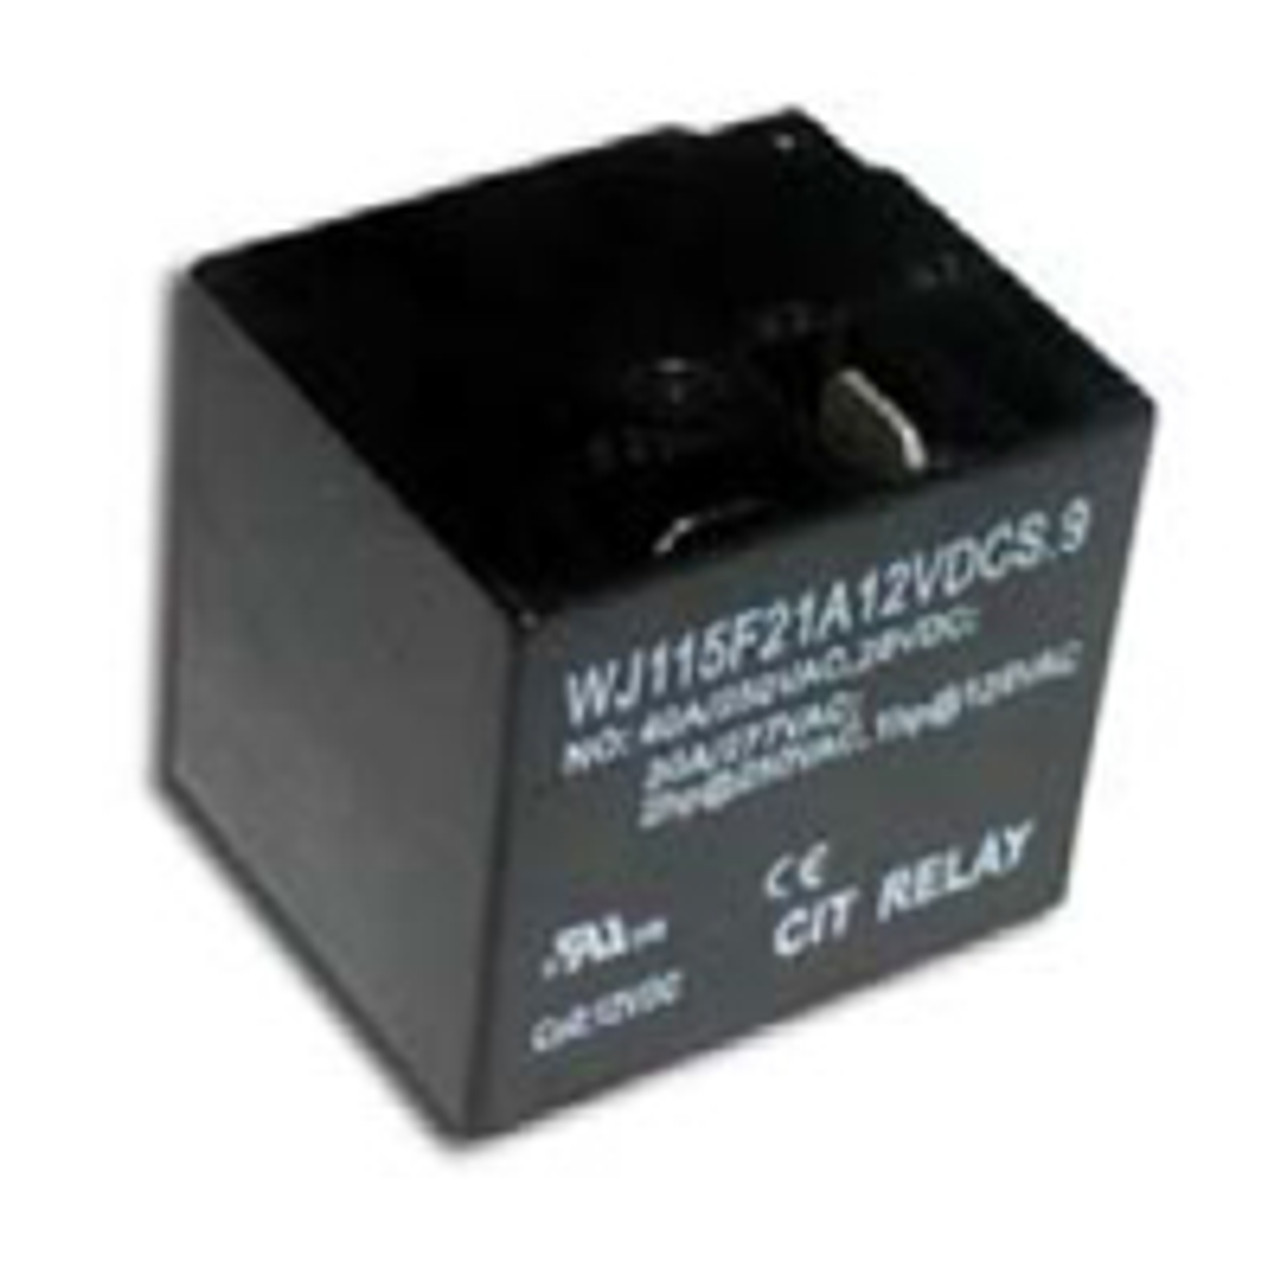 CIT Relay and Switch J115F21C24VDCN.9U Power Relays